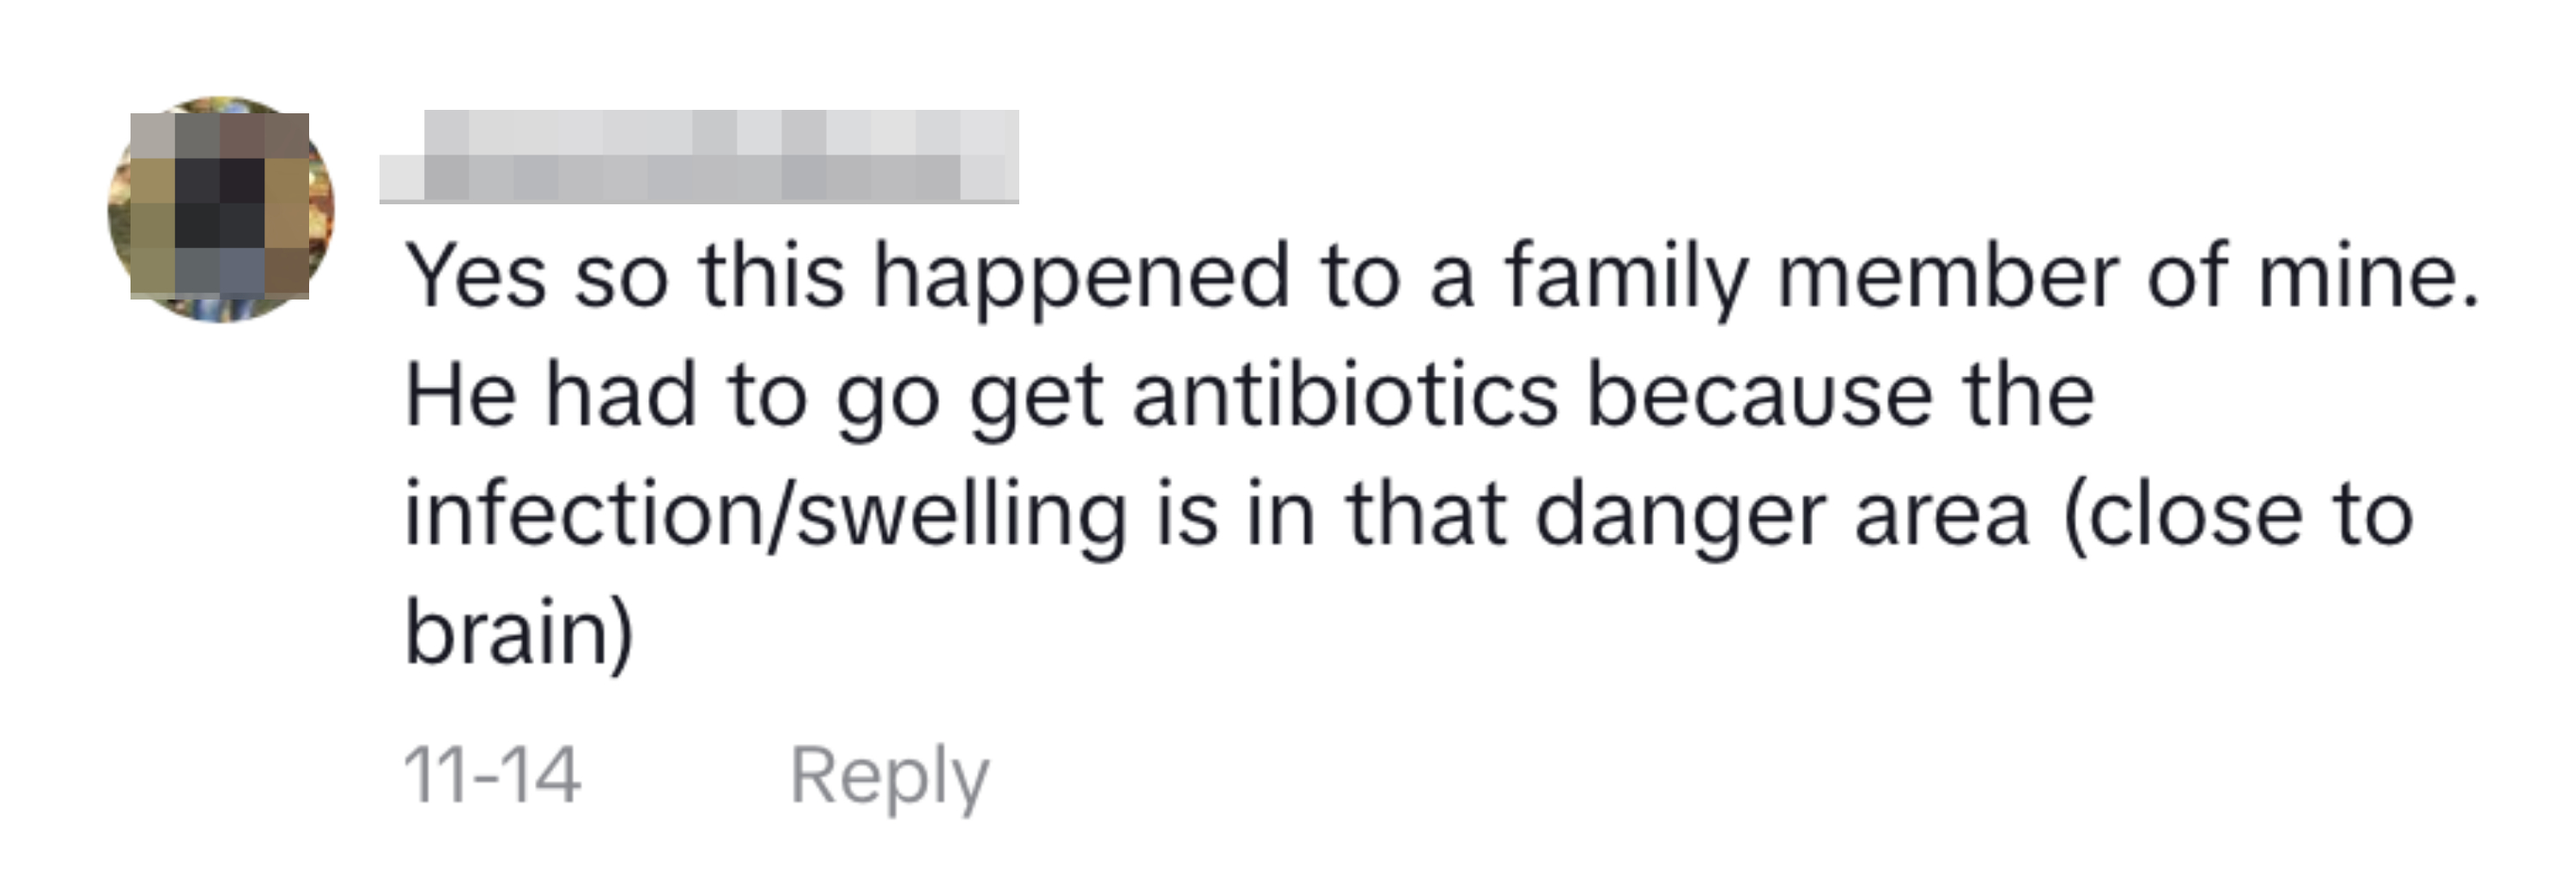 &quot;Yes, so this happened to a family member of mine. He had to go get antibiotics because the infection/swelling is in that danger area (close to the brain)&quot;